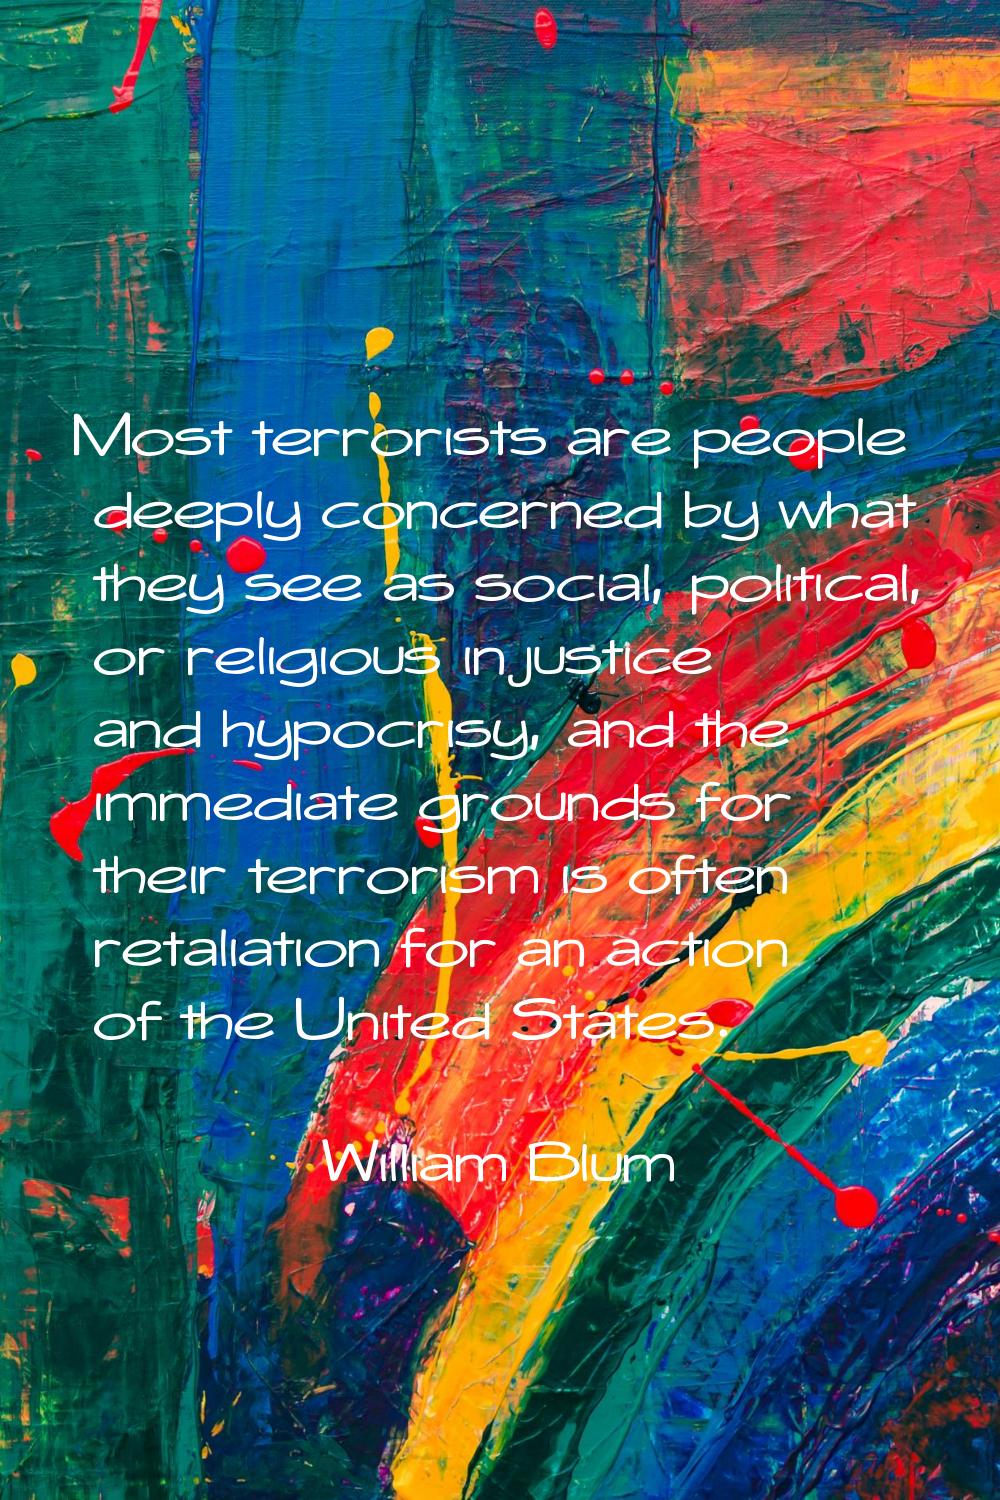 Most terrorists are people deeply concerned by what they see as social, political, or religious inj